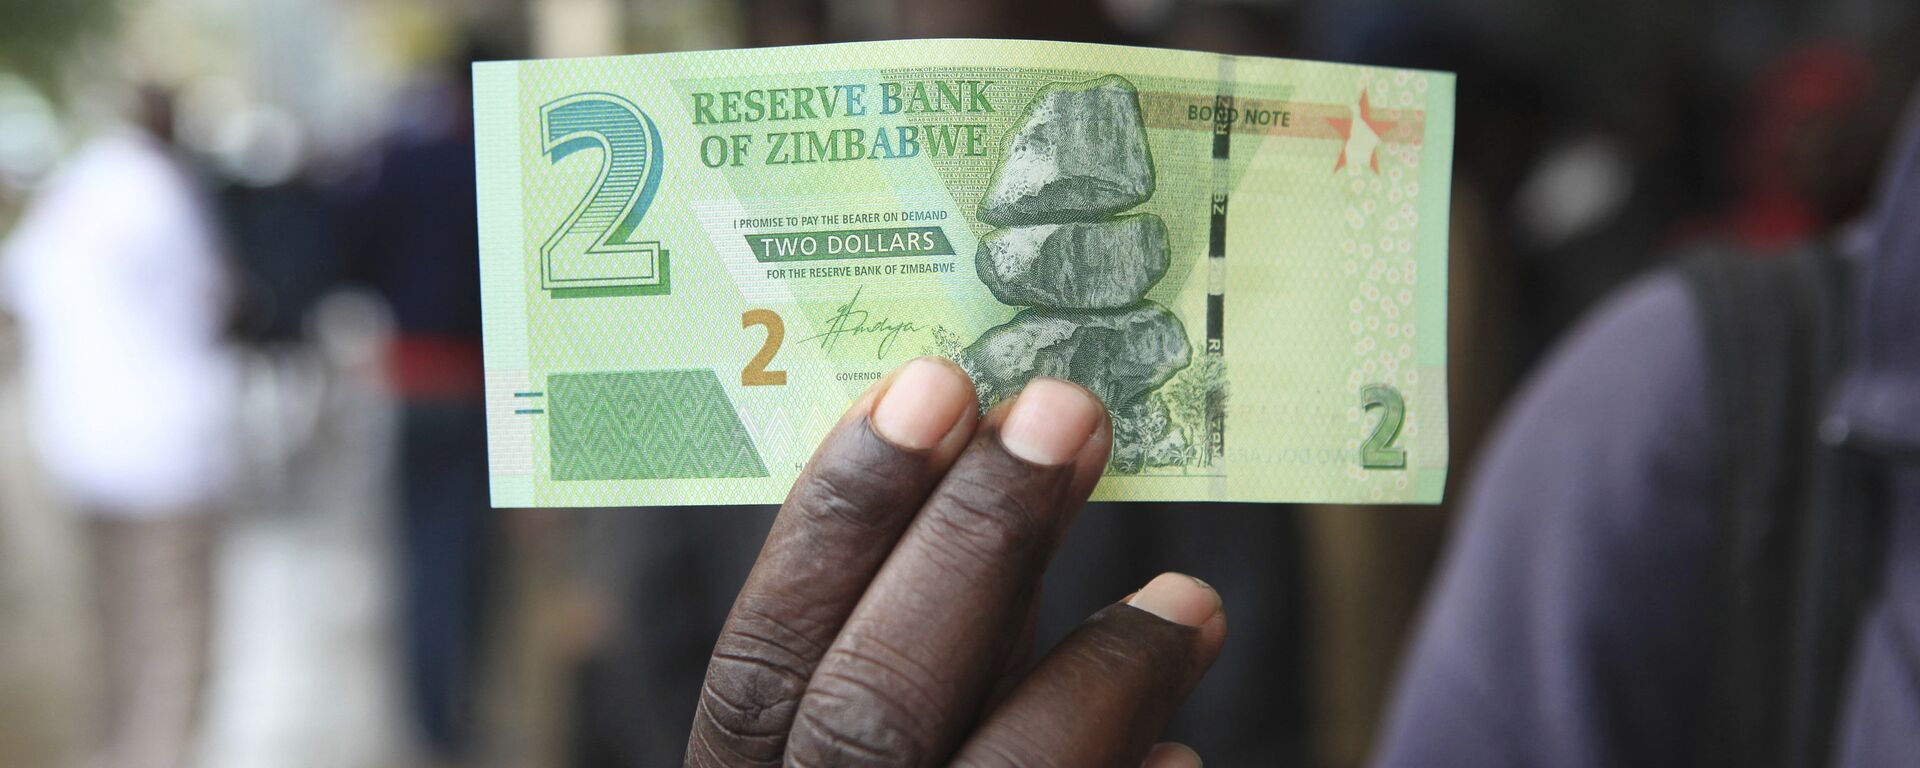 A man shows a new note introduced by the Reserve Bank of Zimbabwe in Harare, Monday, Nov, 28, 2016 - Sputnik International, 1920, 08.03.2019